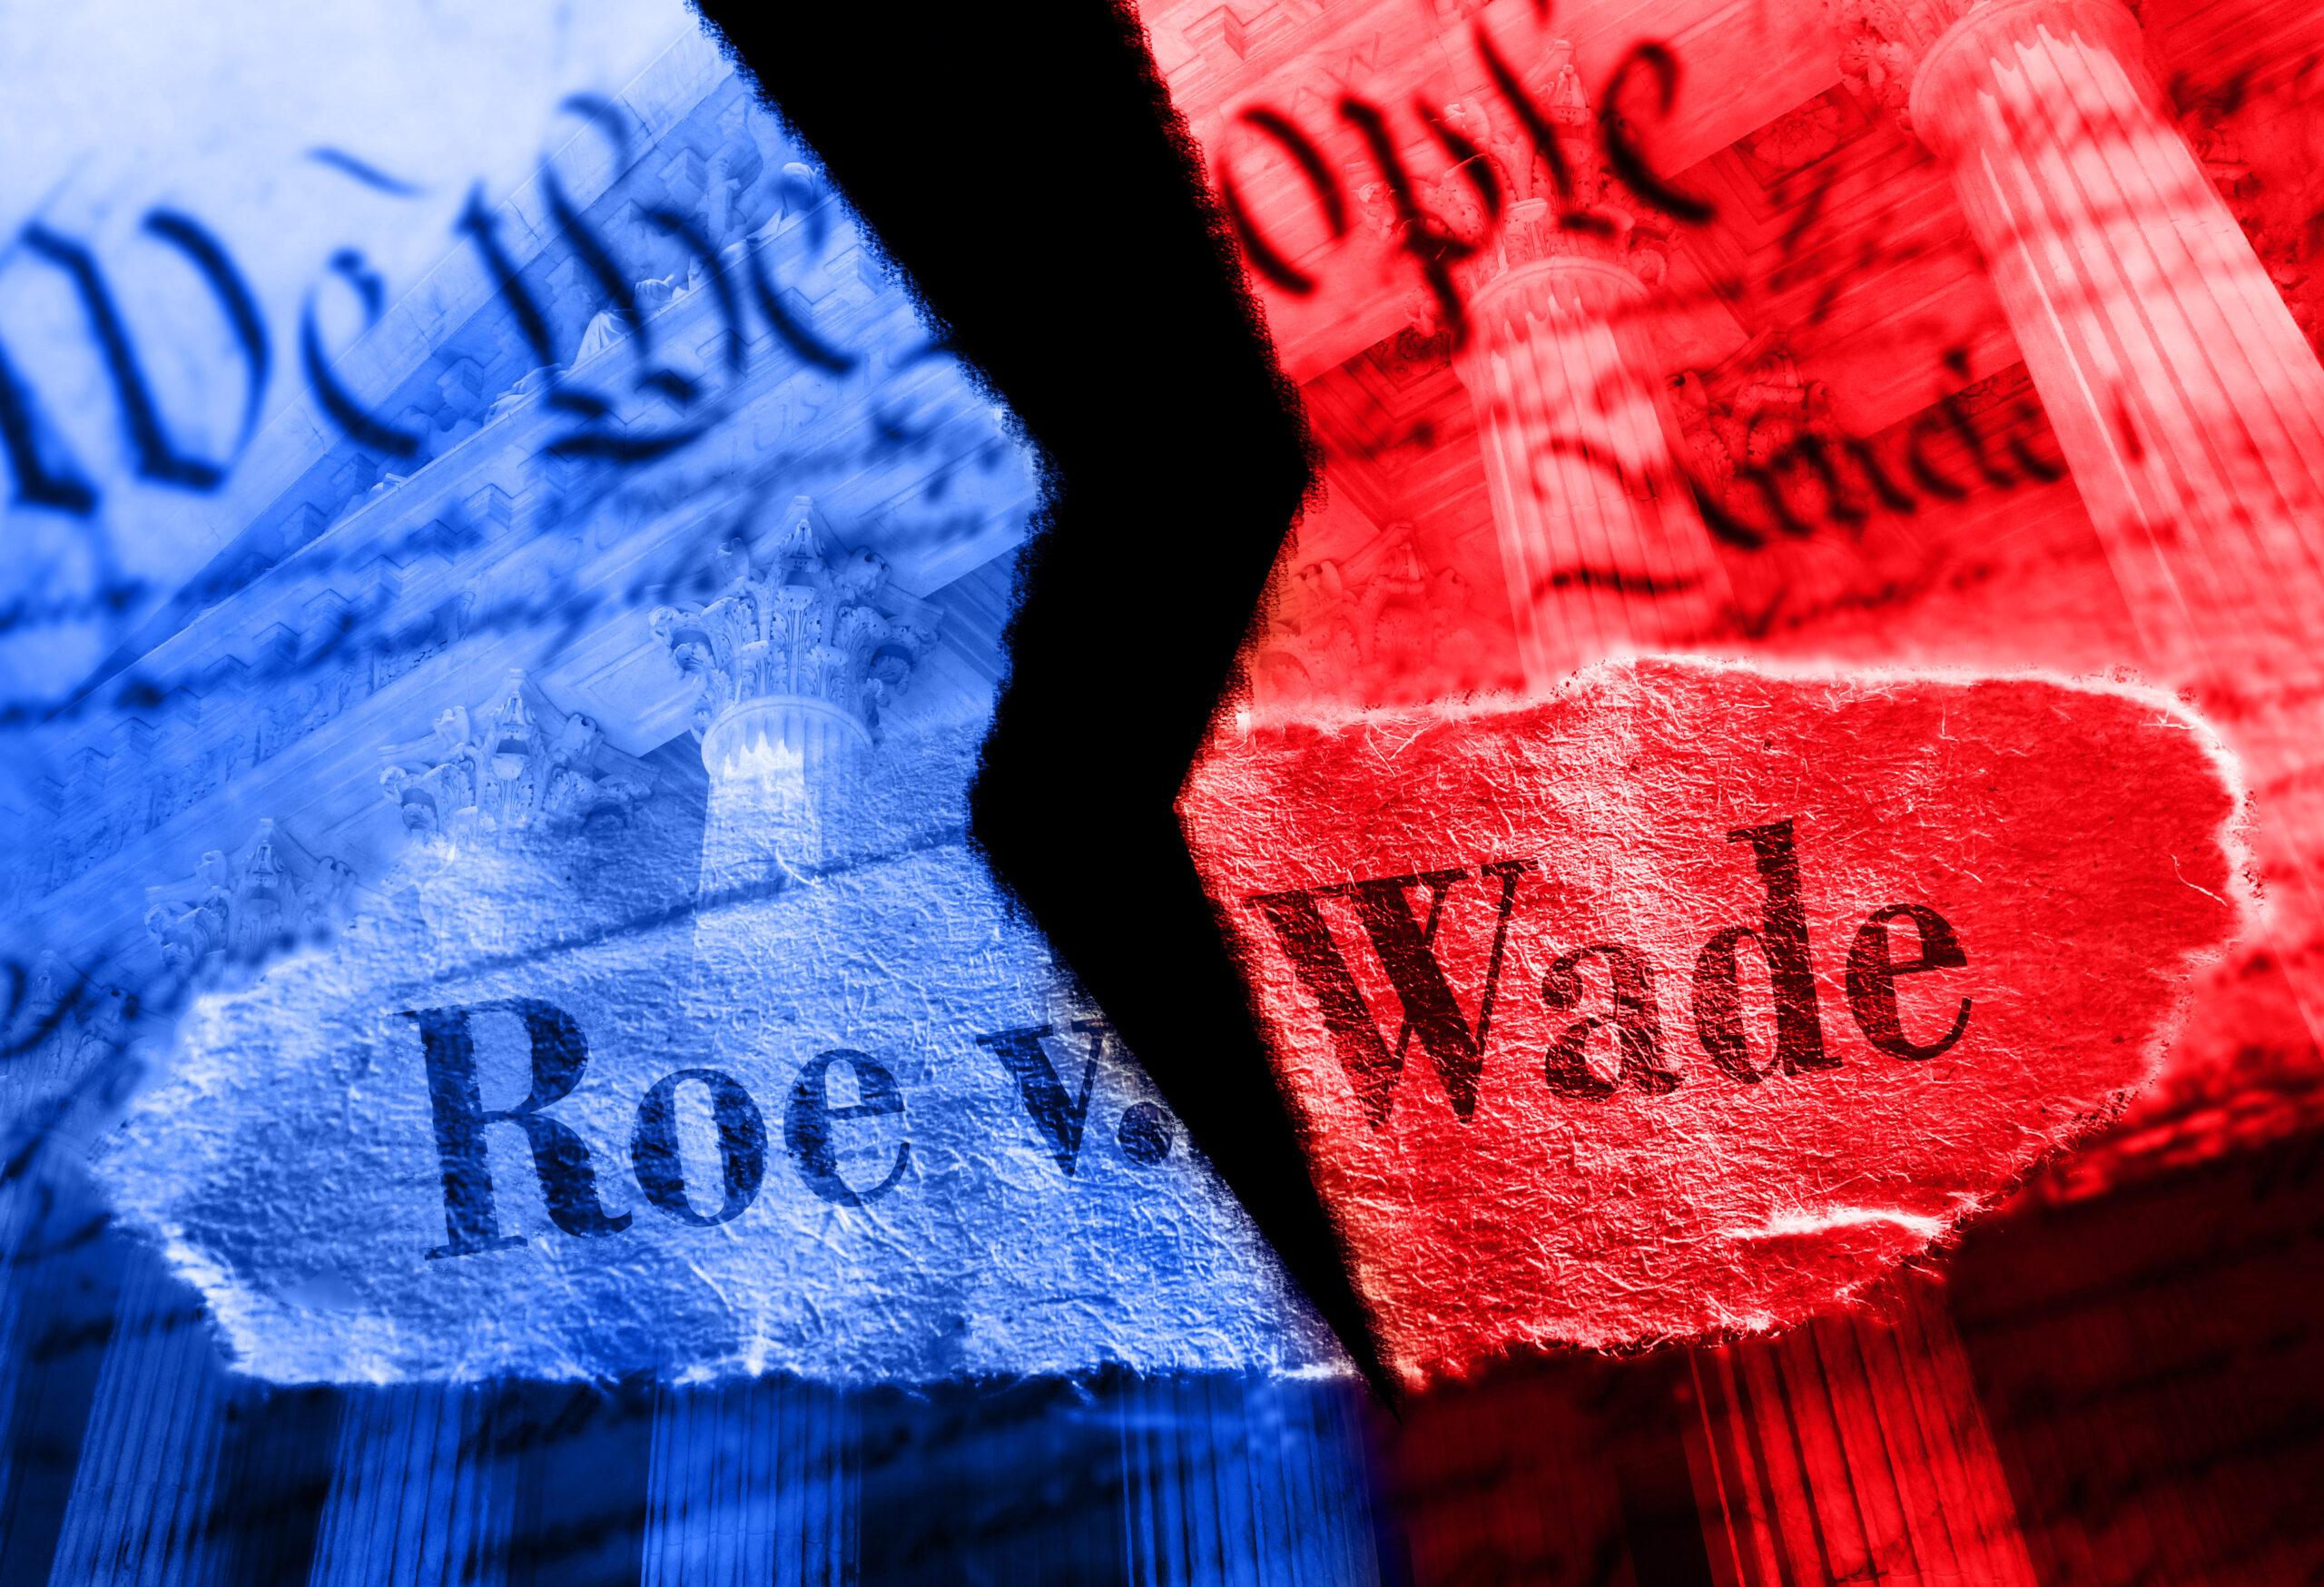 Torn Roe V Wade newspaper headline in red and blue on the US Constitution with the United States Supreme Court in background